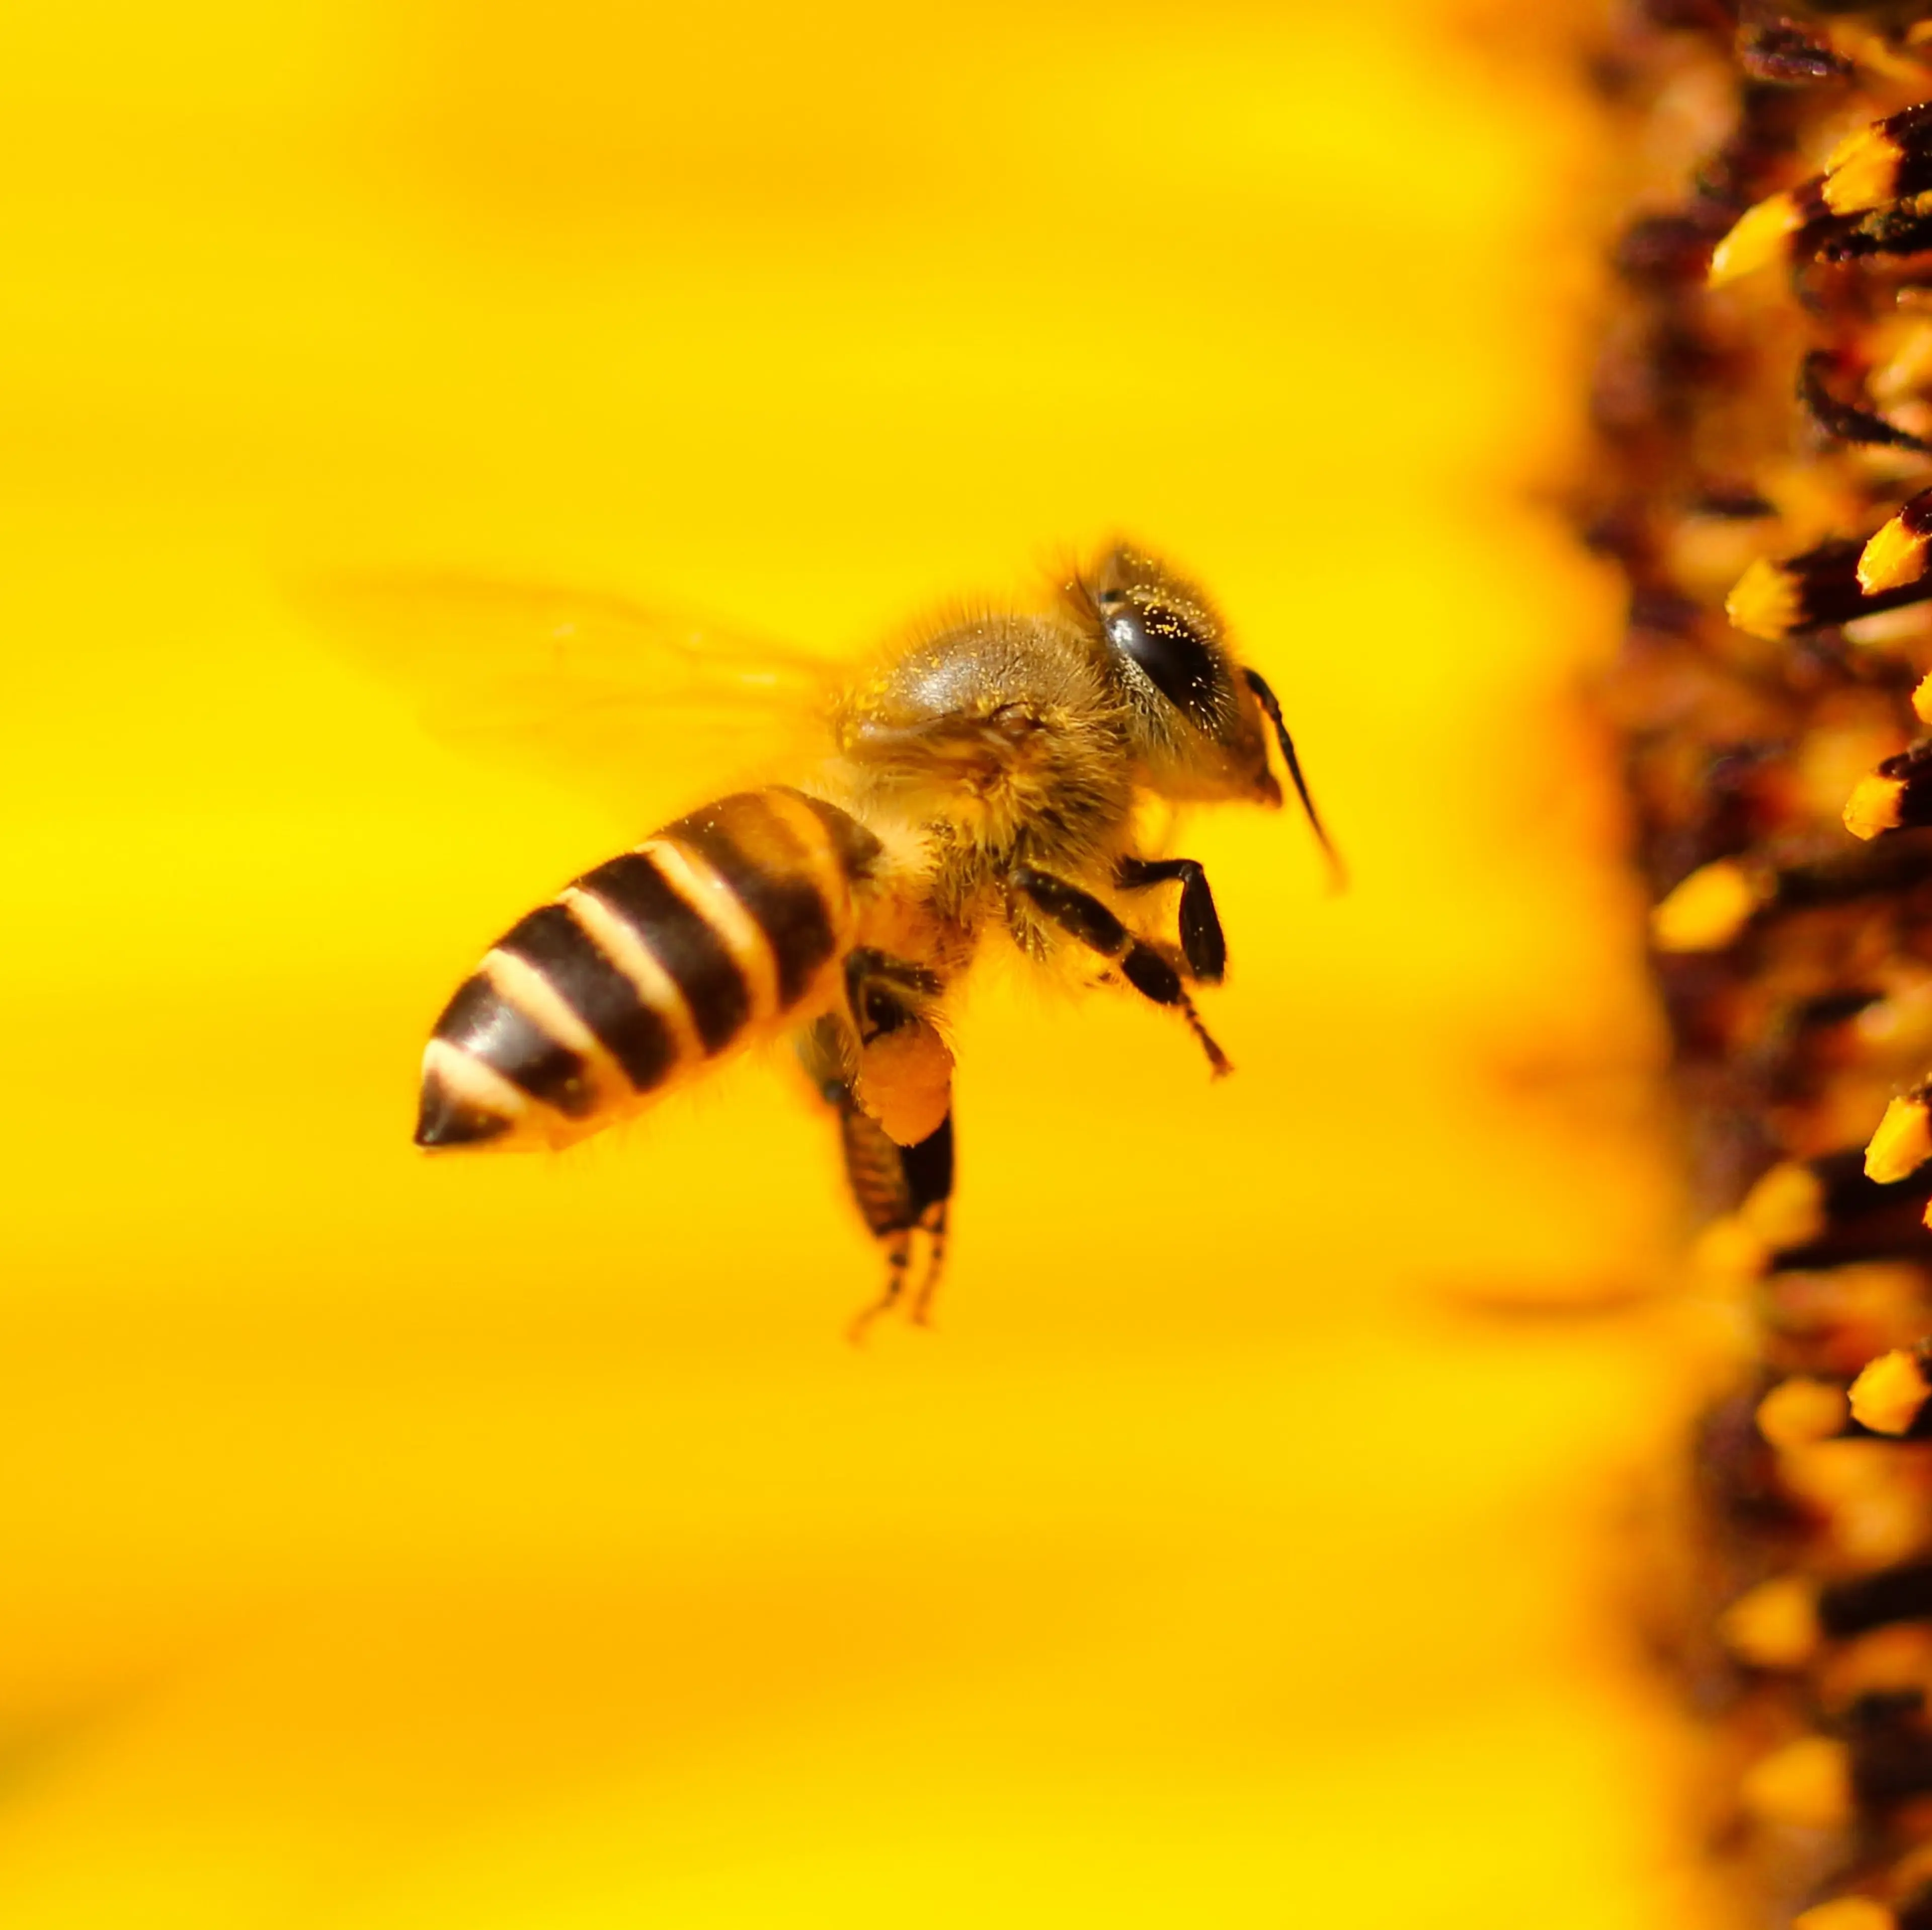 Image of a bee in flight.